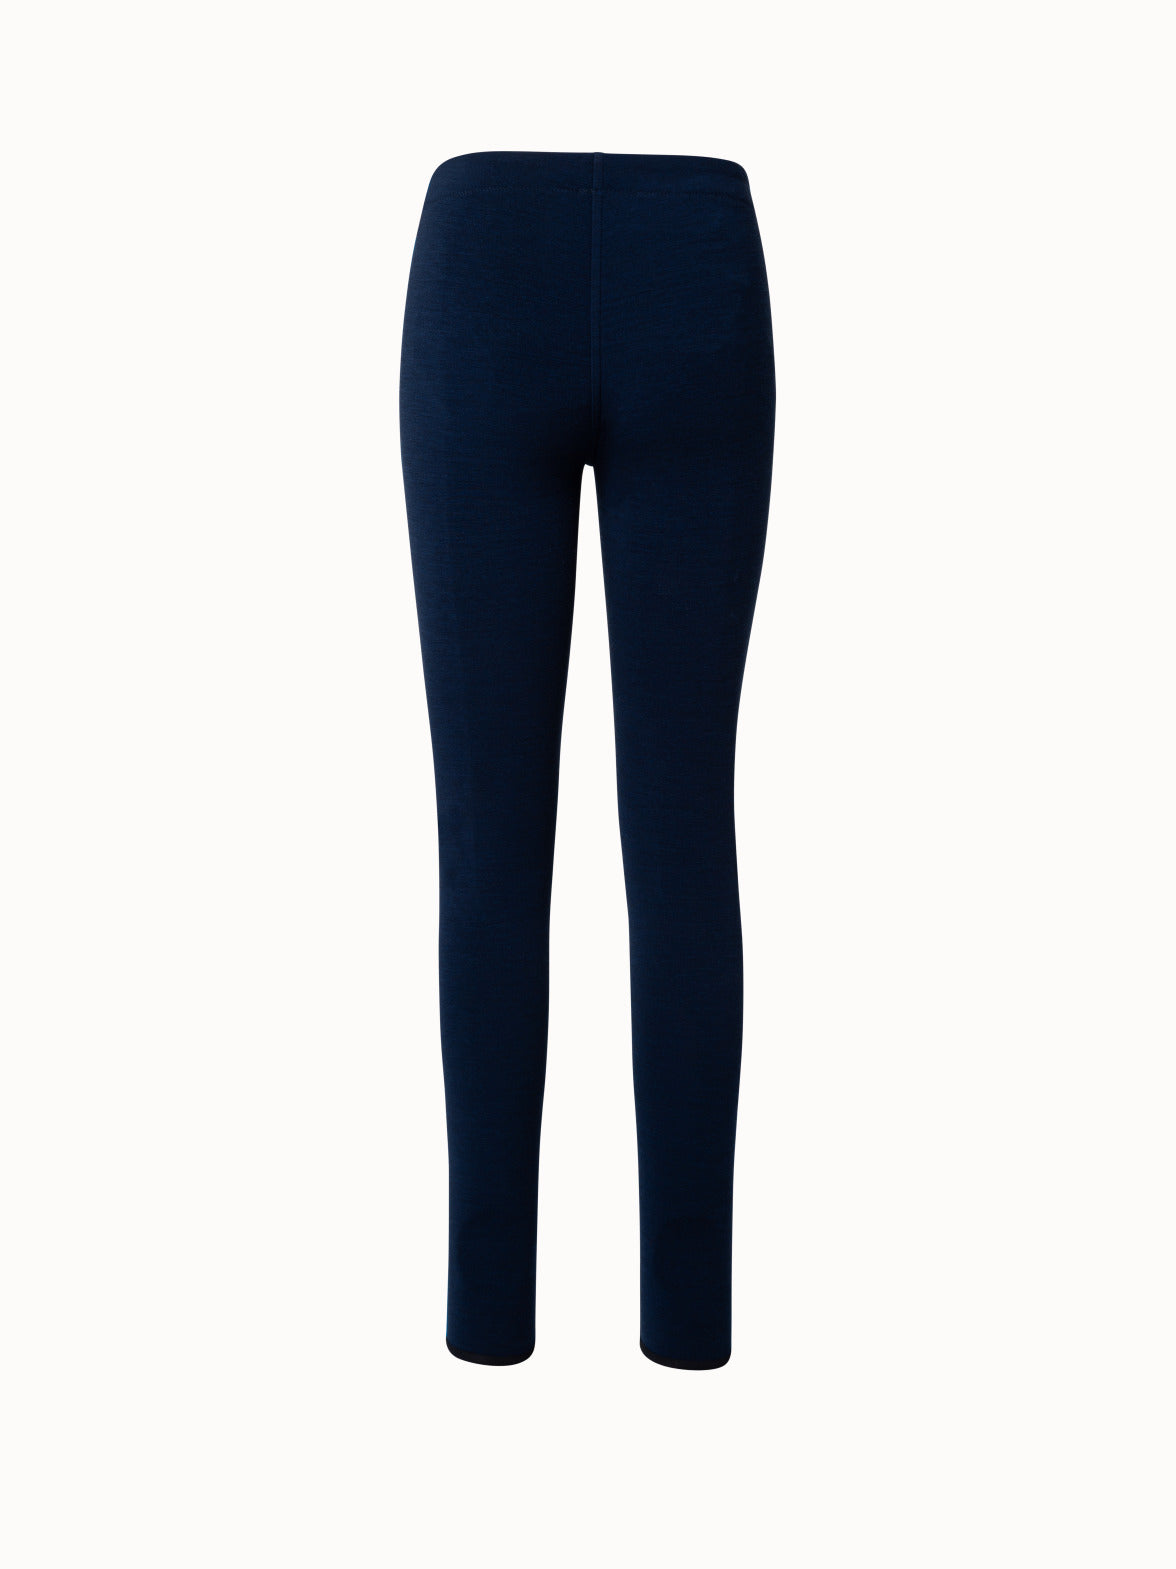 Straight Leg Crepe Pants - Navy with side stripe